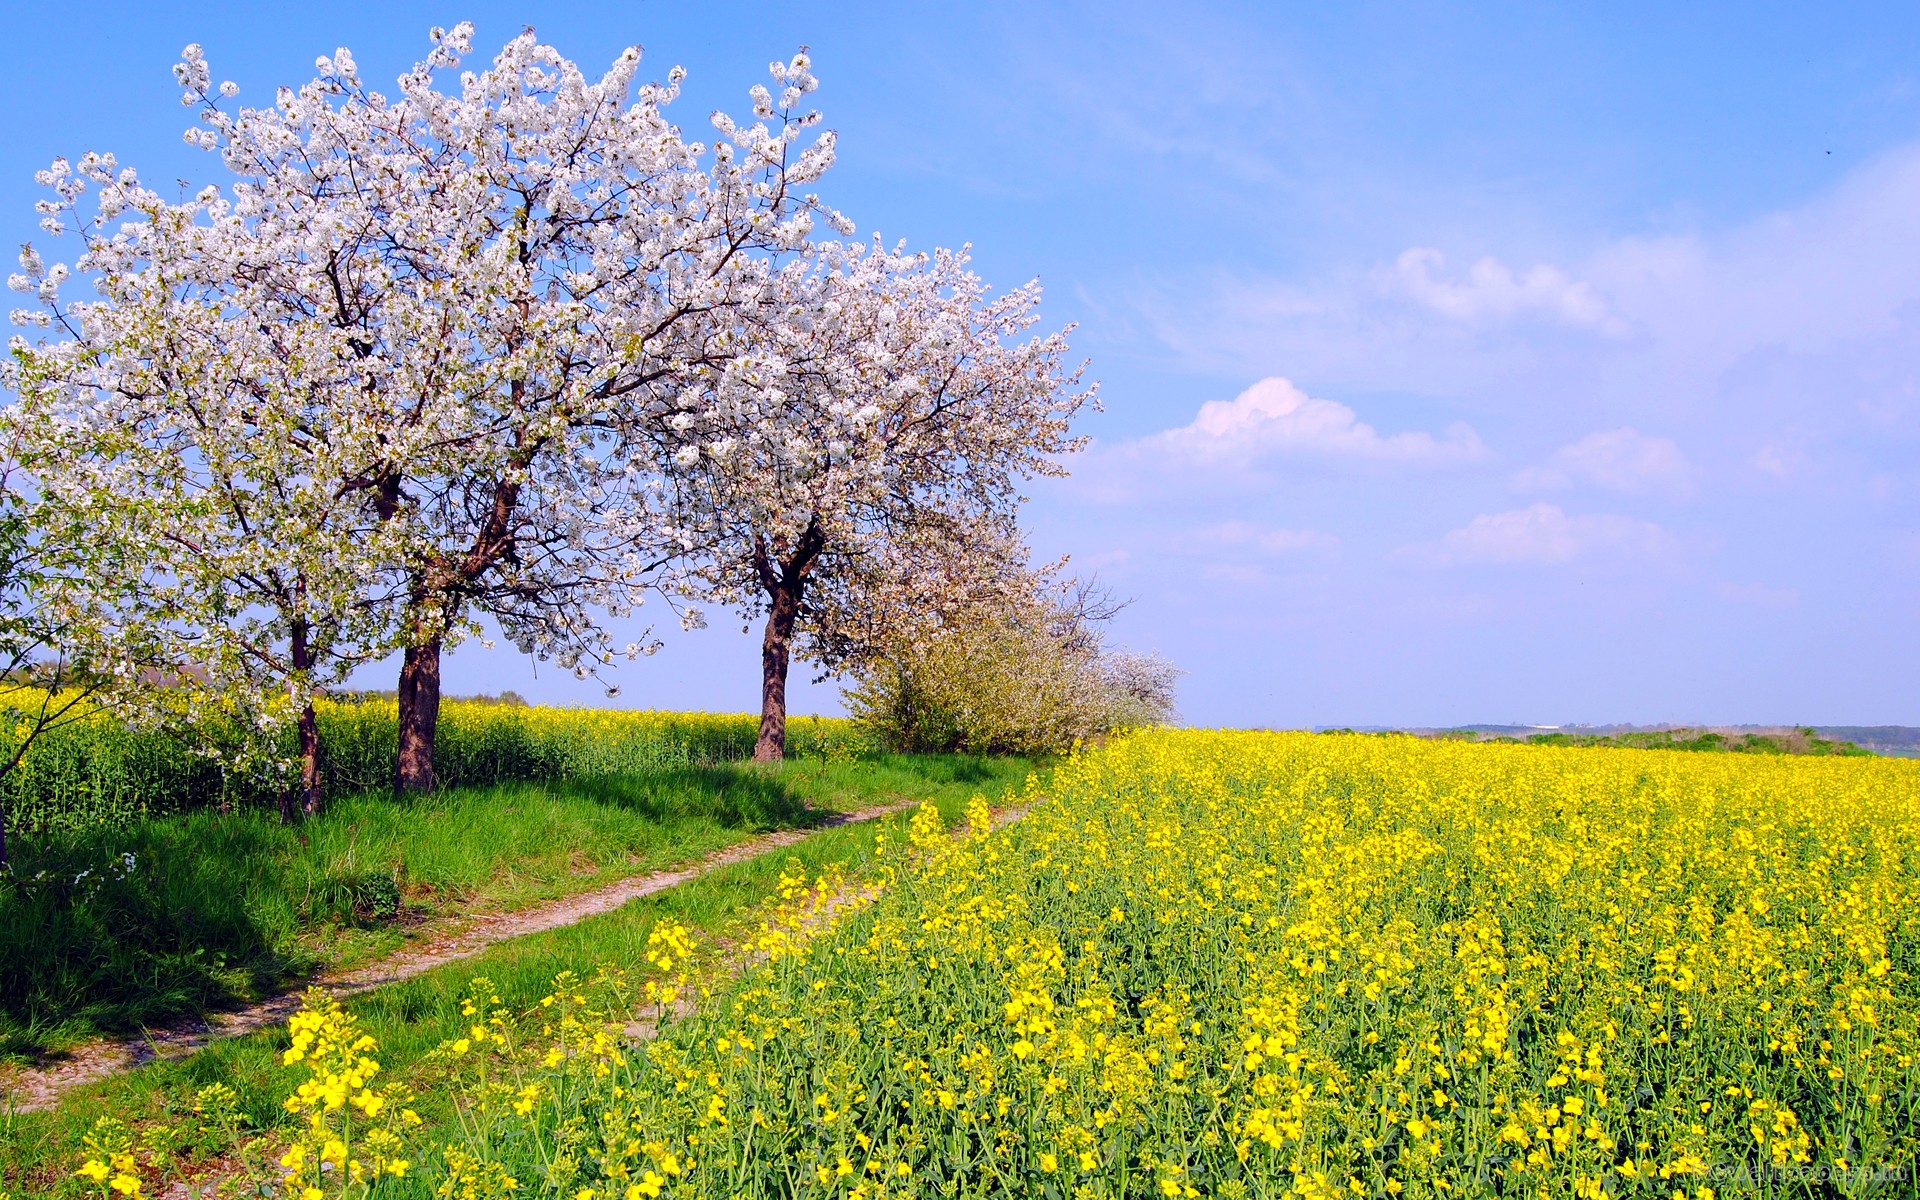 The Spring Wallpaper Category Of HD Widescreen